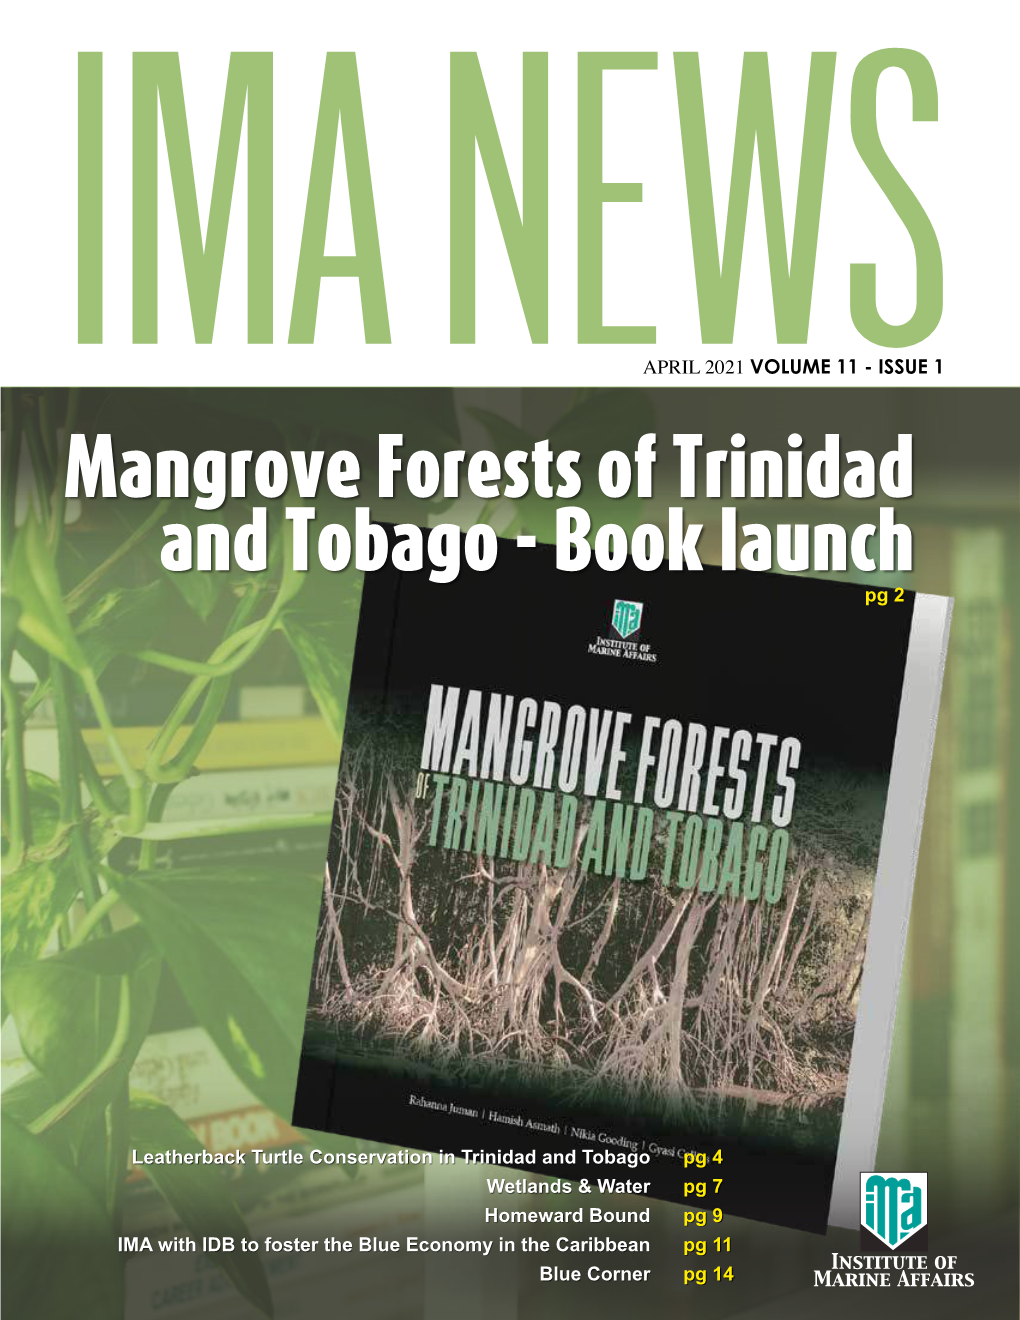 Mangrove Forests of Trinidad and Tobago - Book Launch